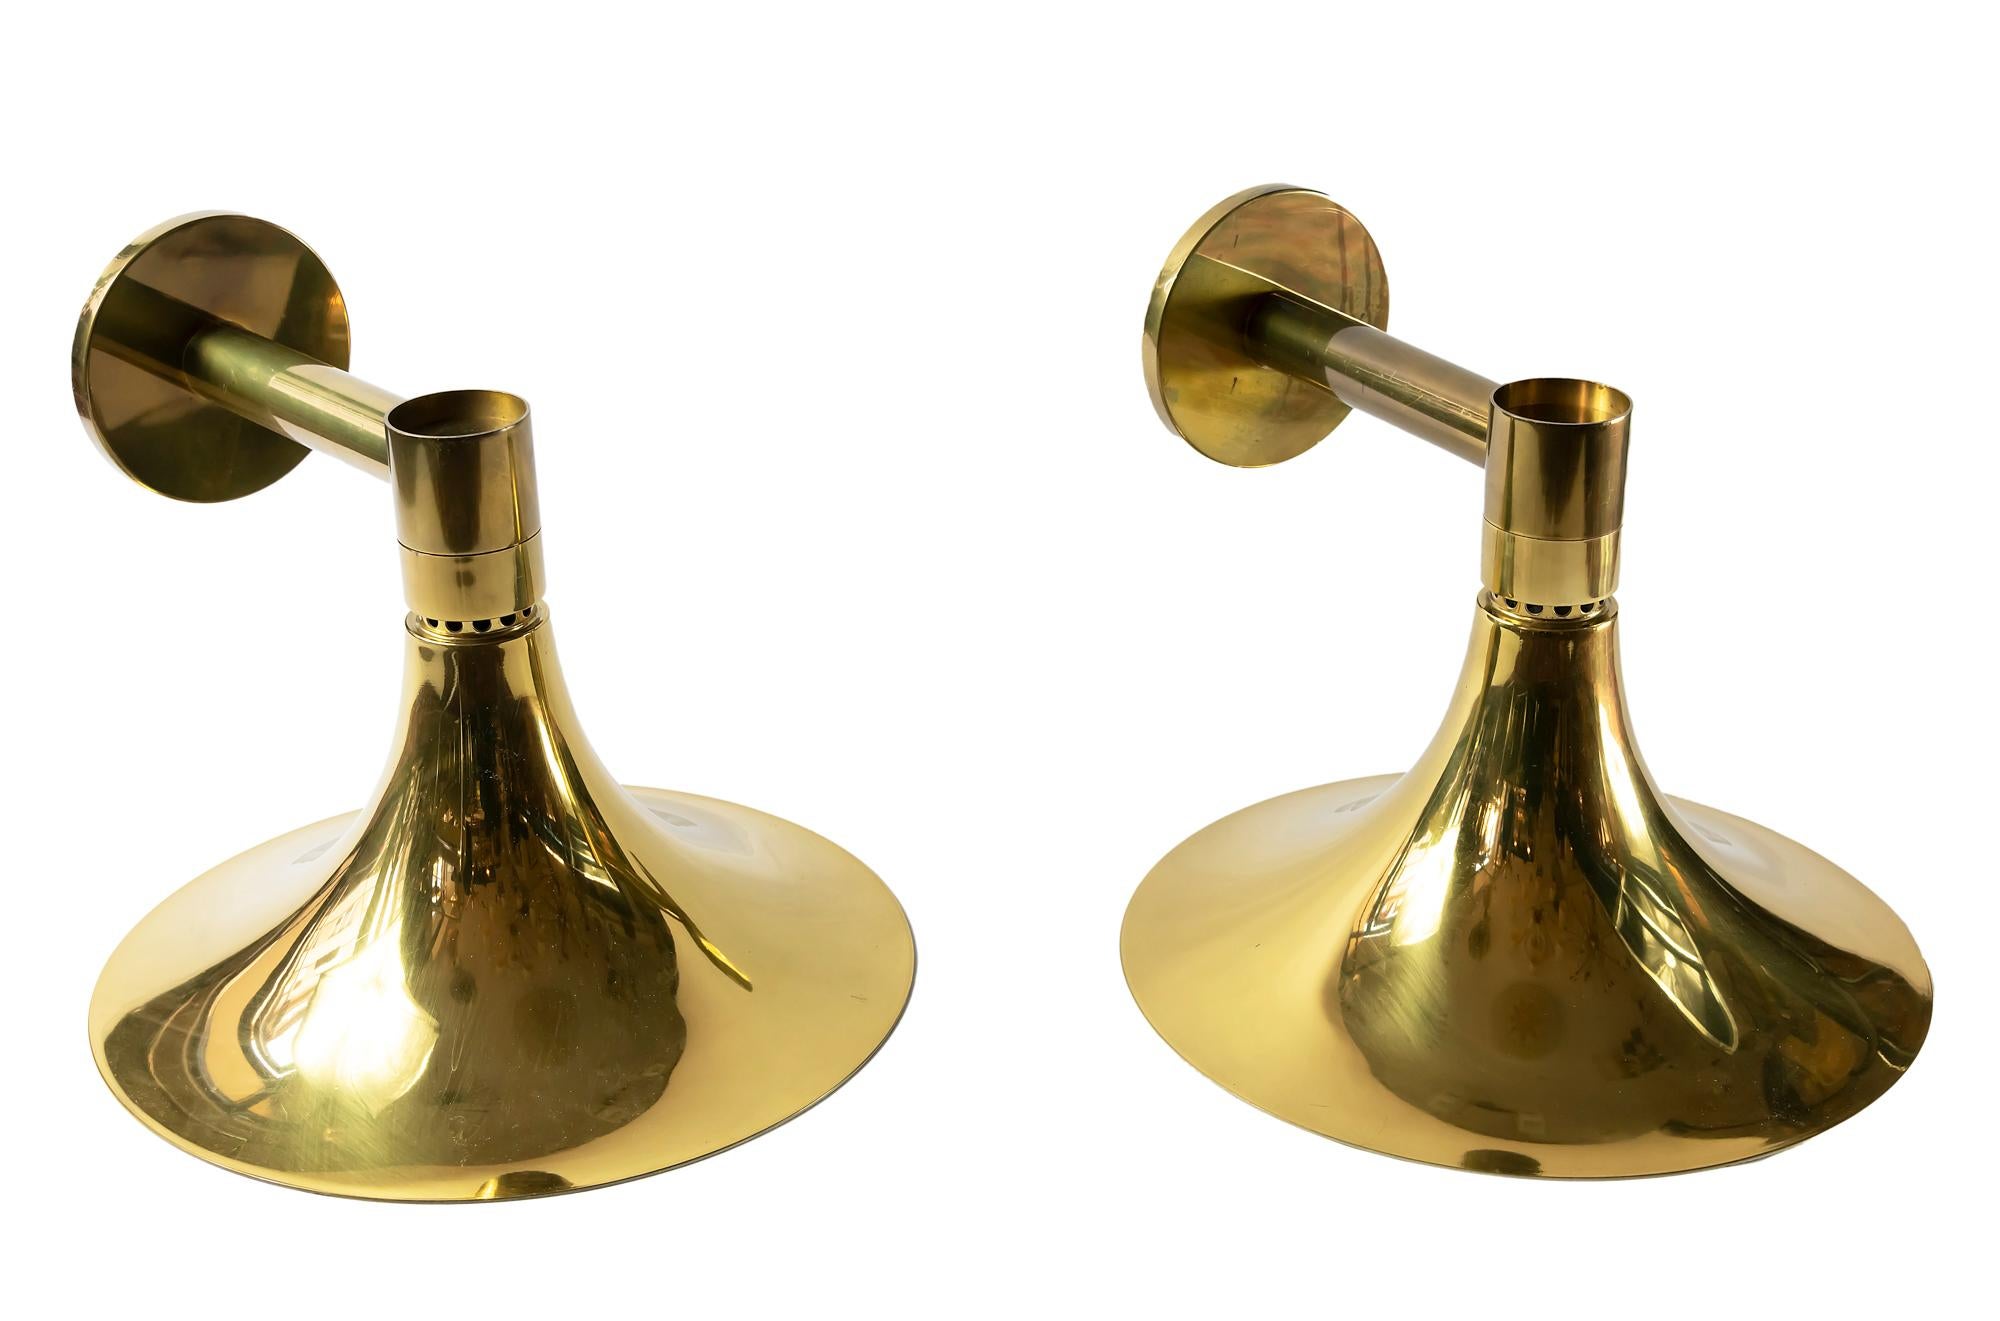 Pair of wall light sconces made of brass with inside surface in white color.
Bulbs are E27 (1 pieces in each sconce).